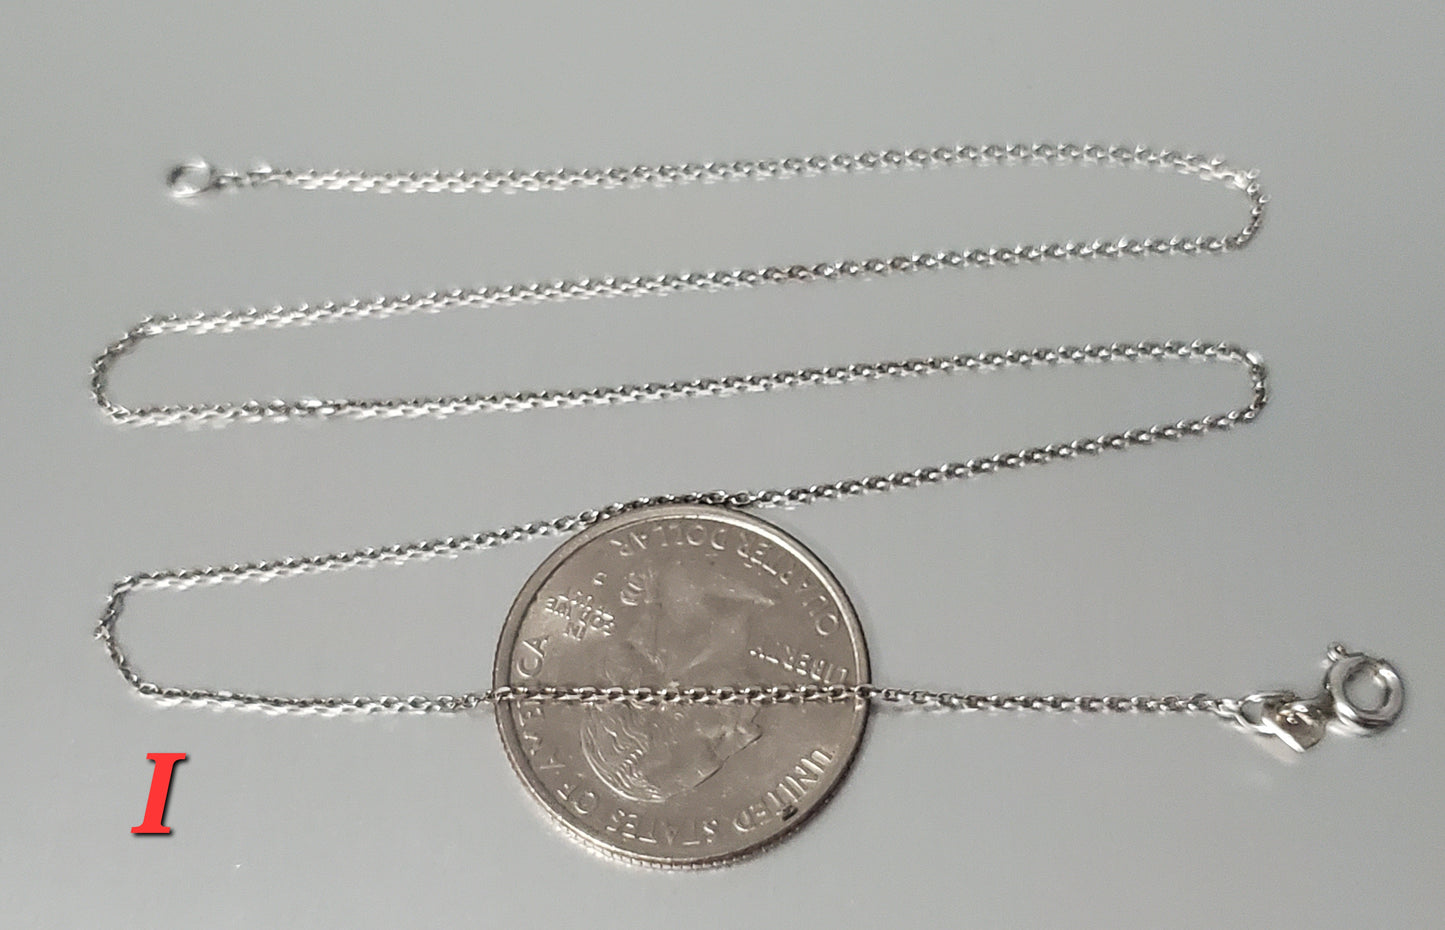 16 Inch Sterling Silver Chains $5 Choice